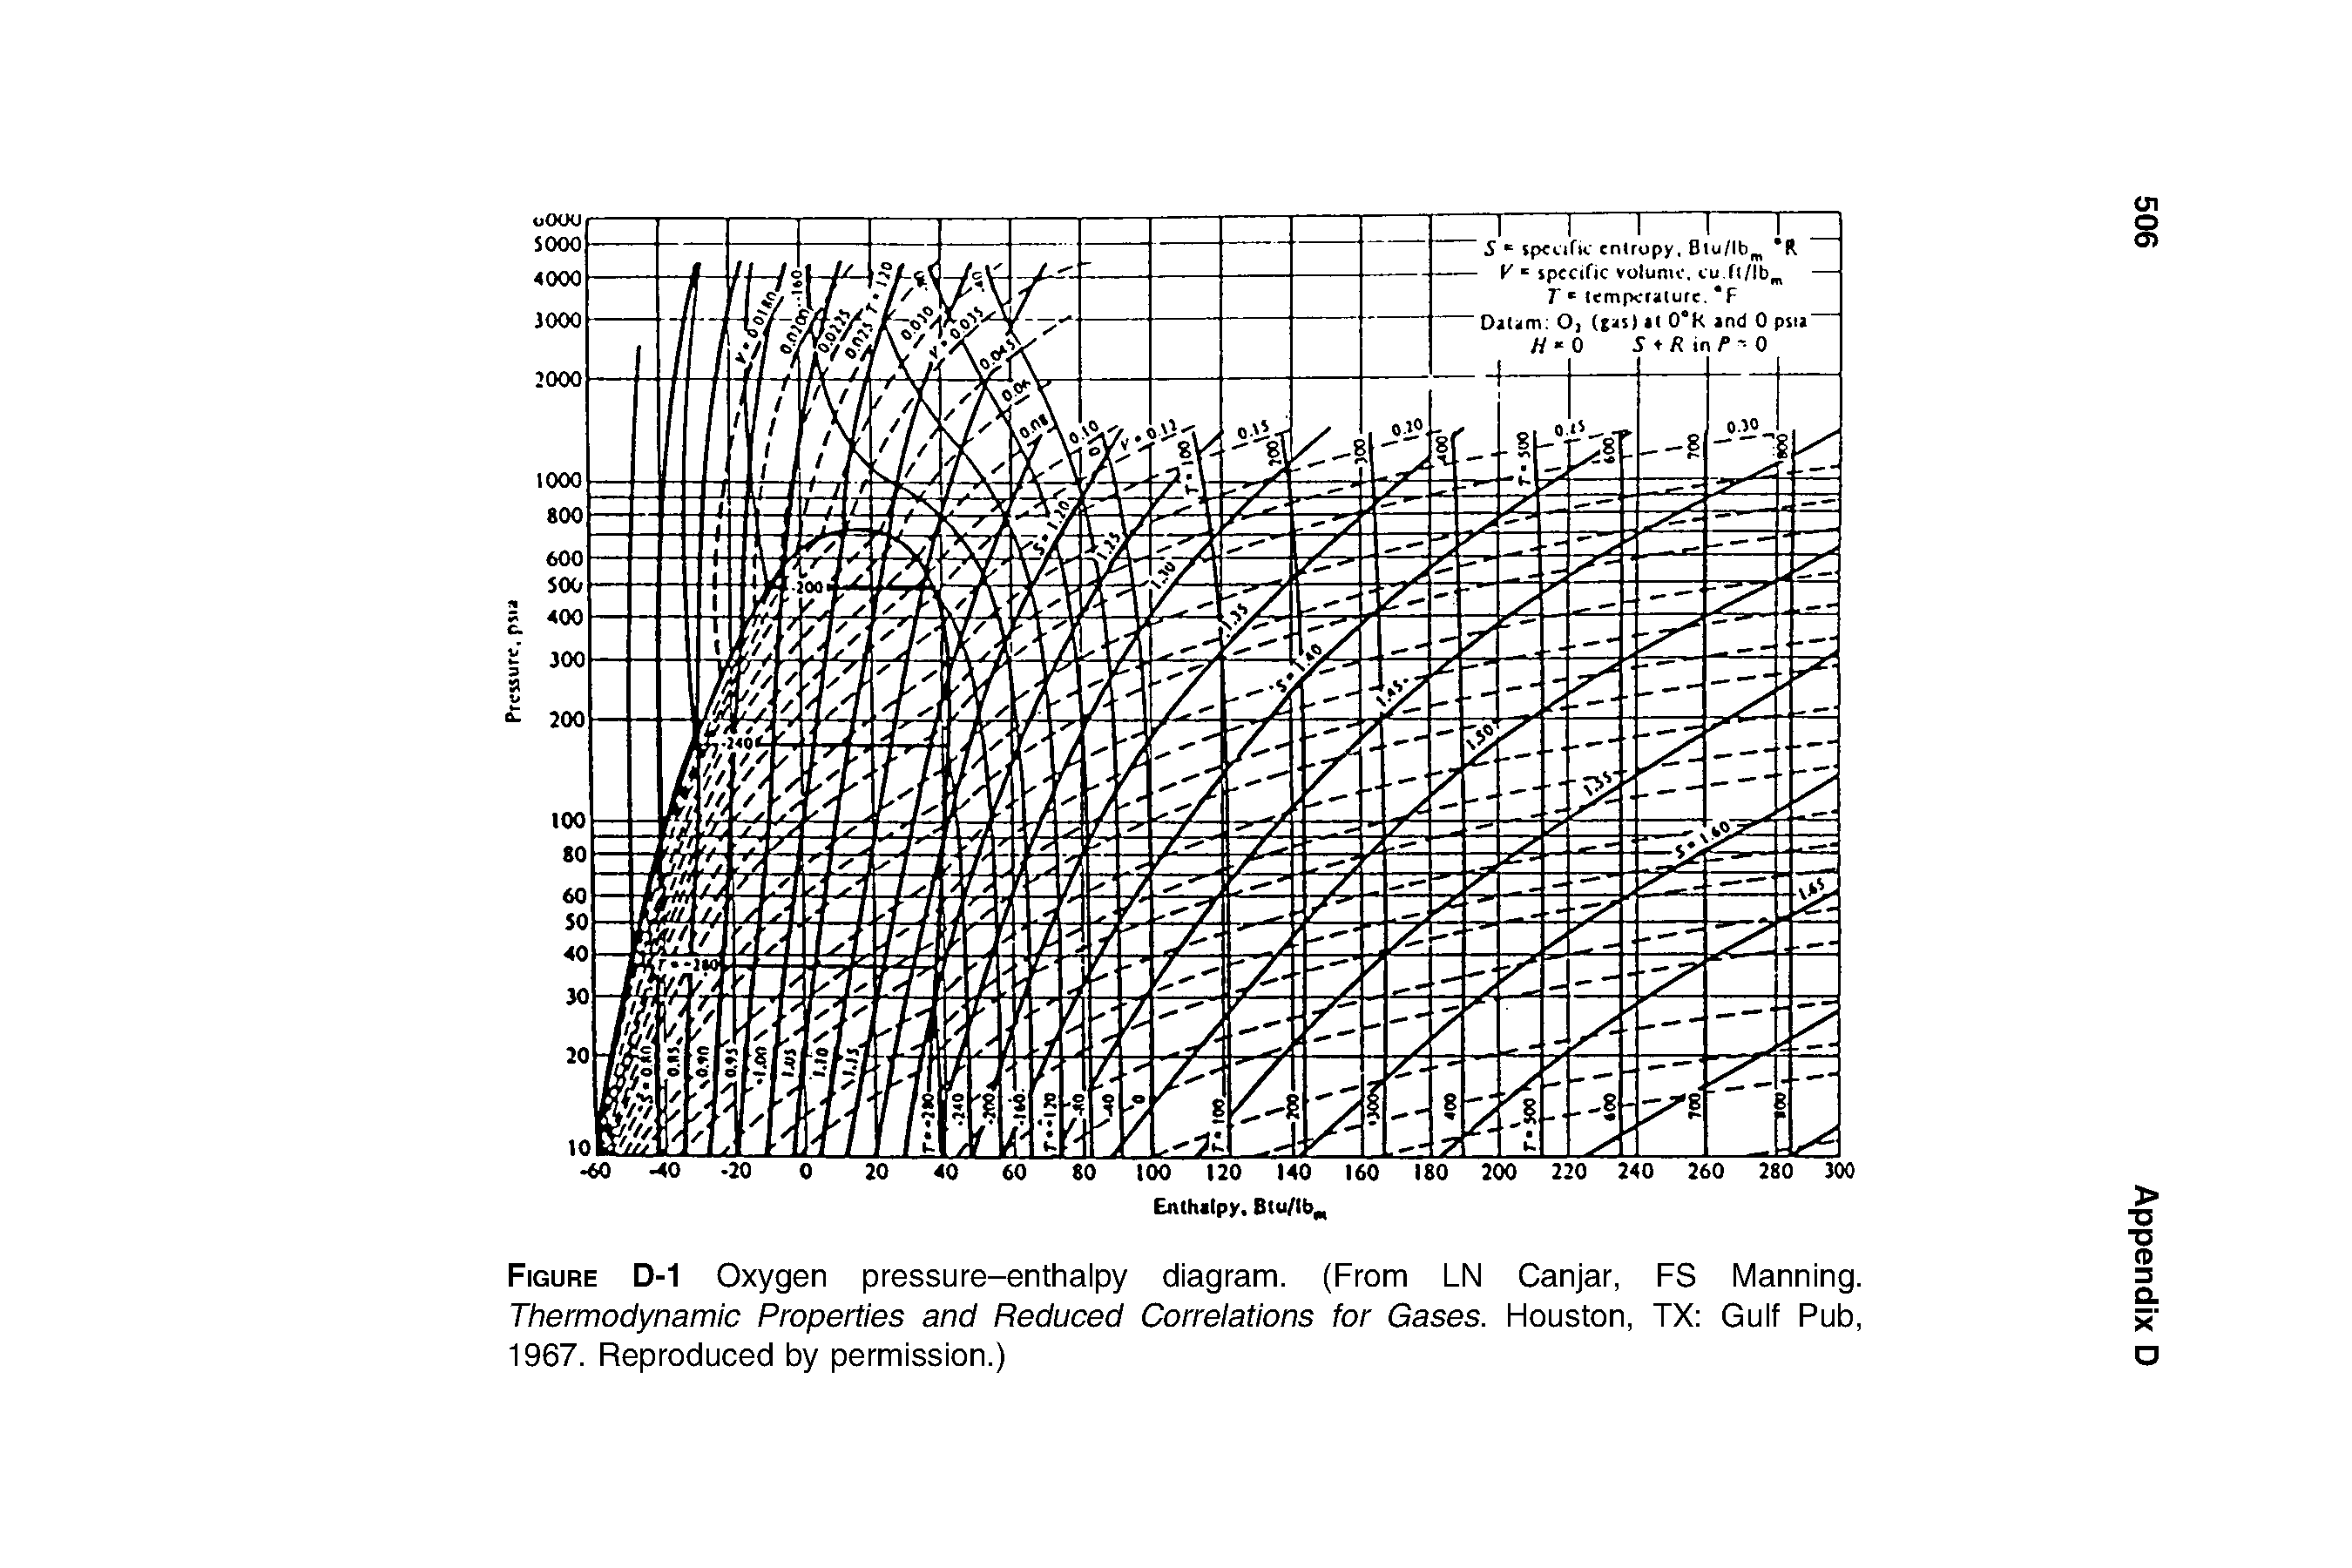 Figure D-1 Oxygen pressure-enthalpy diagram. (From LN Canjar, FS Manning. Thermodynamic Properties and Reduced Correlations for Gases. Houston, TX Gulf Pub, 1967. Reproduced by permission.)...